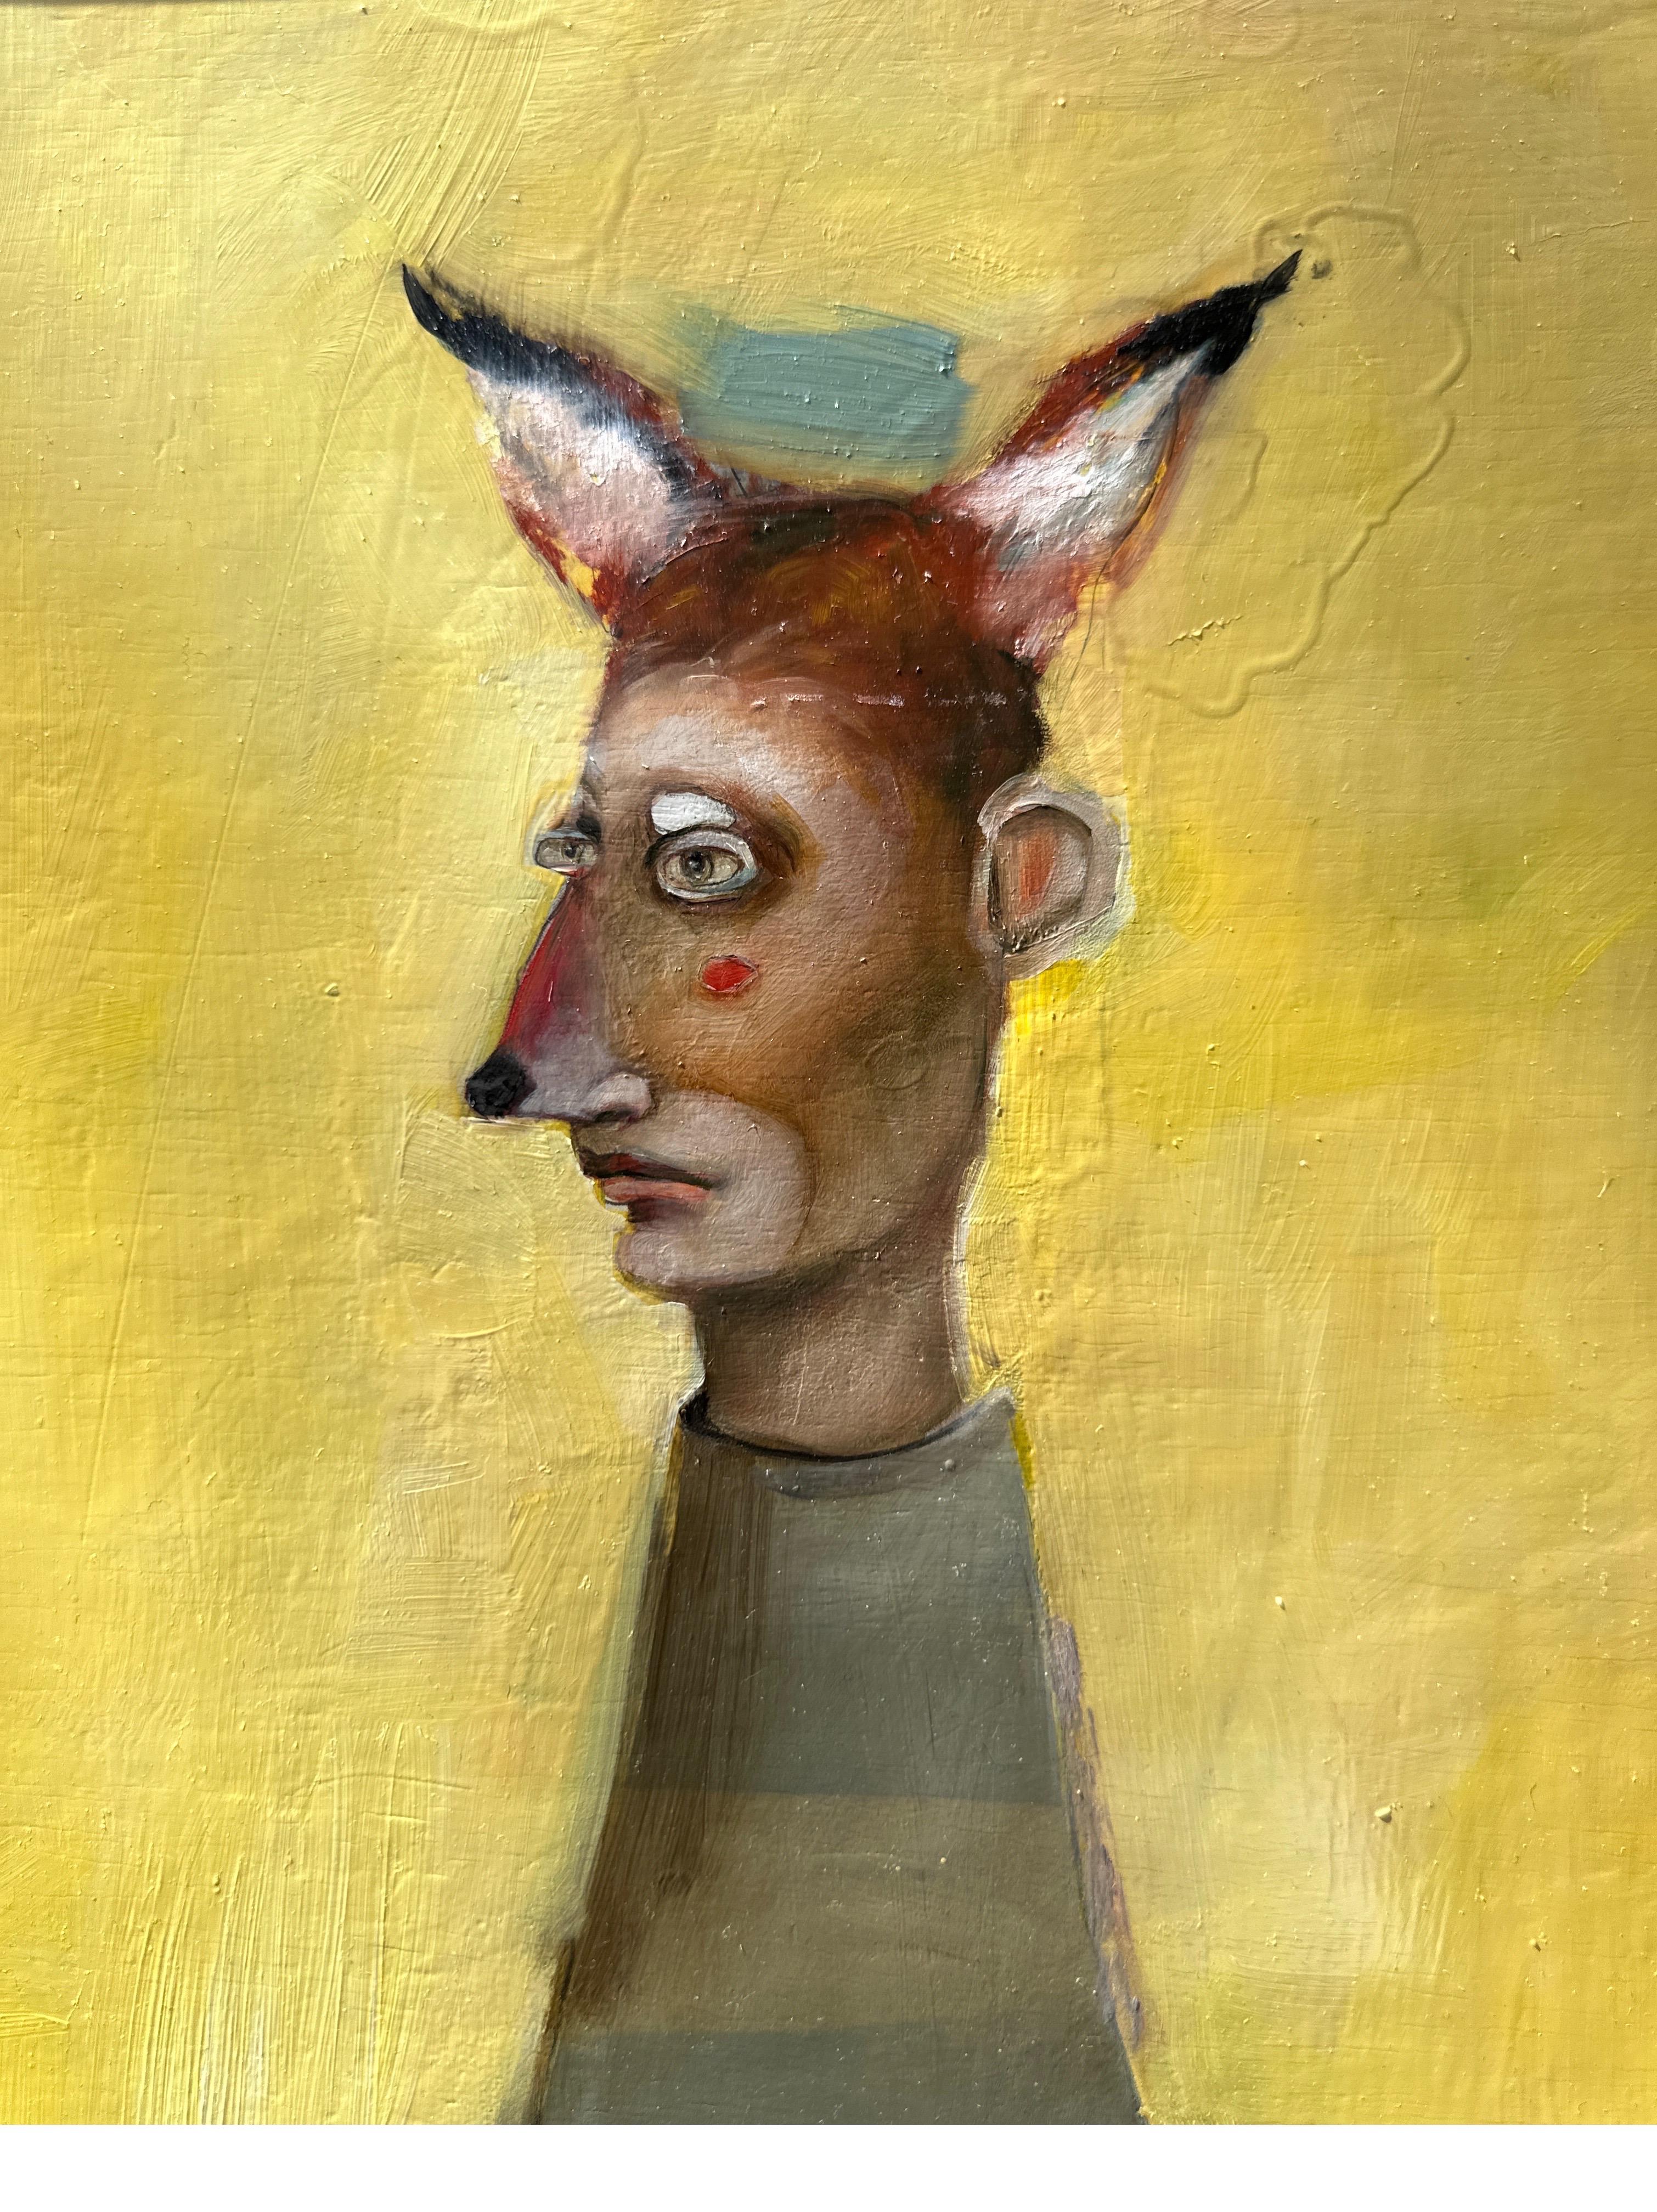 Muddy Fox, Oil on canvas, figurative pop art portrait with yellow background - Contemporary Painting by Michele Mikesell